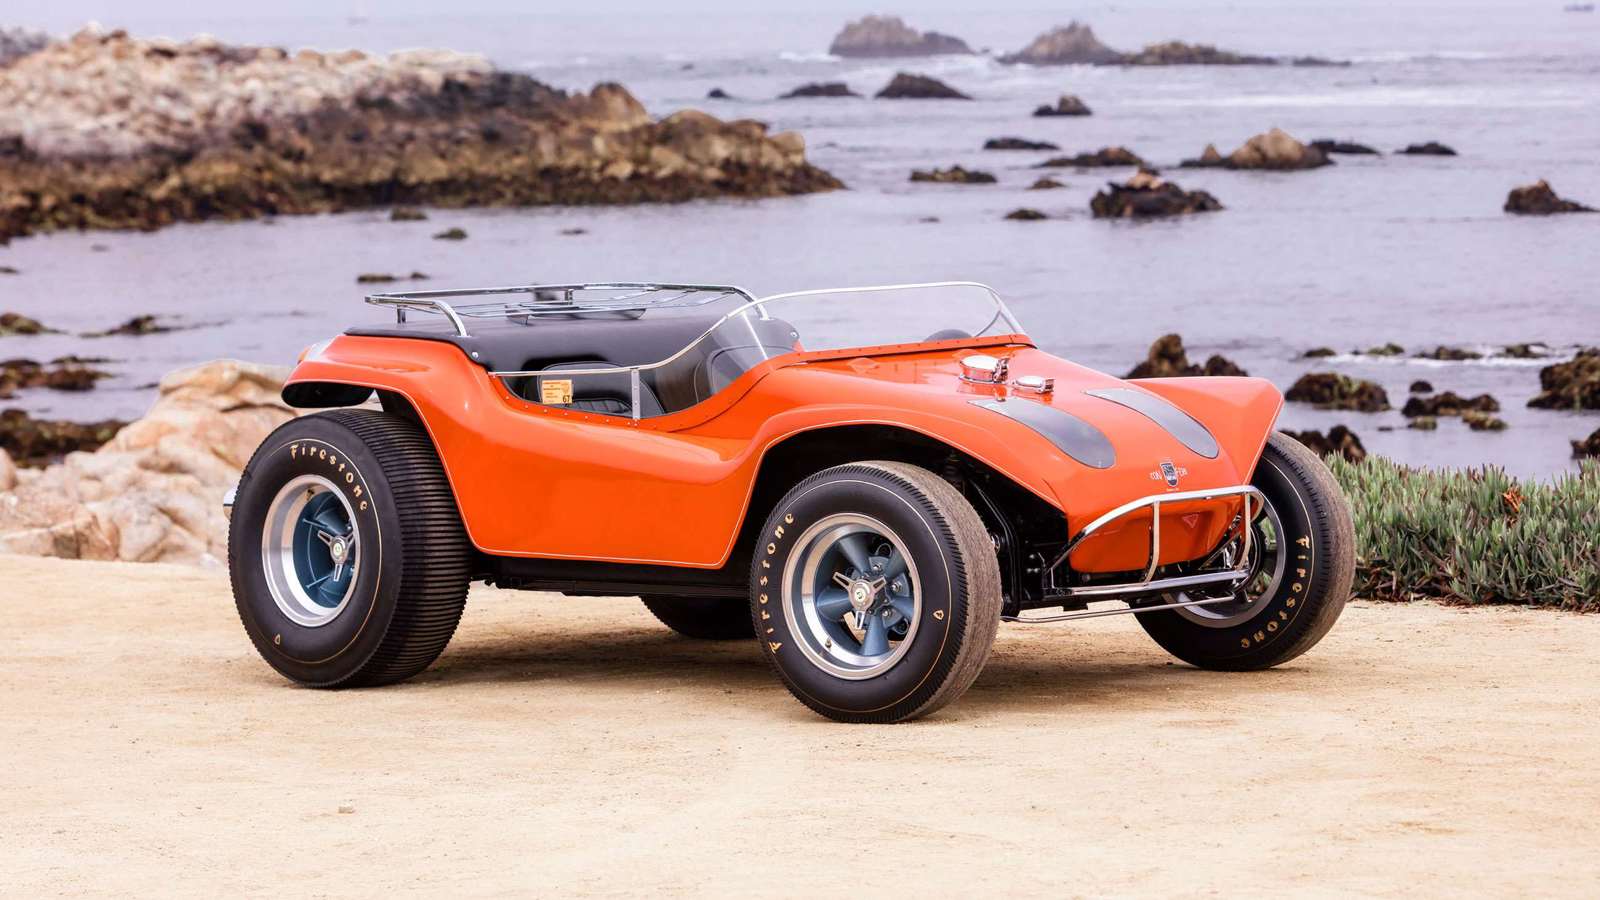 huis Besnoeiing optocht $456,000 Makes this the world's most expensive beach buggy | GRR